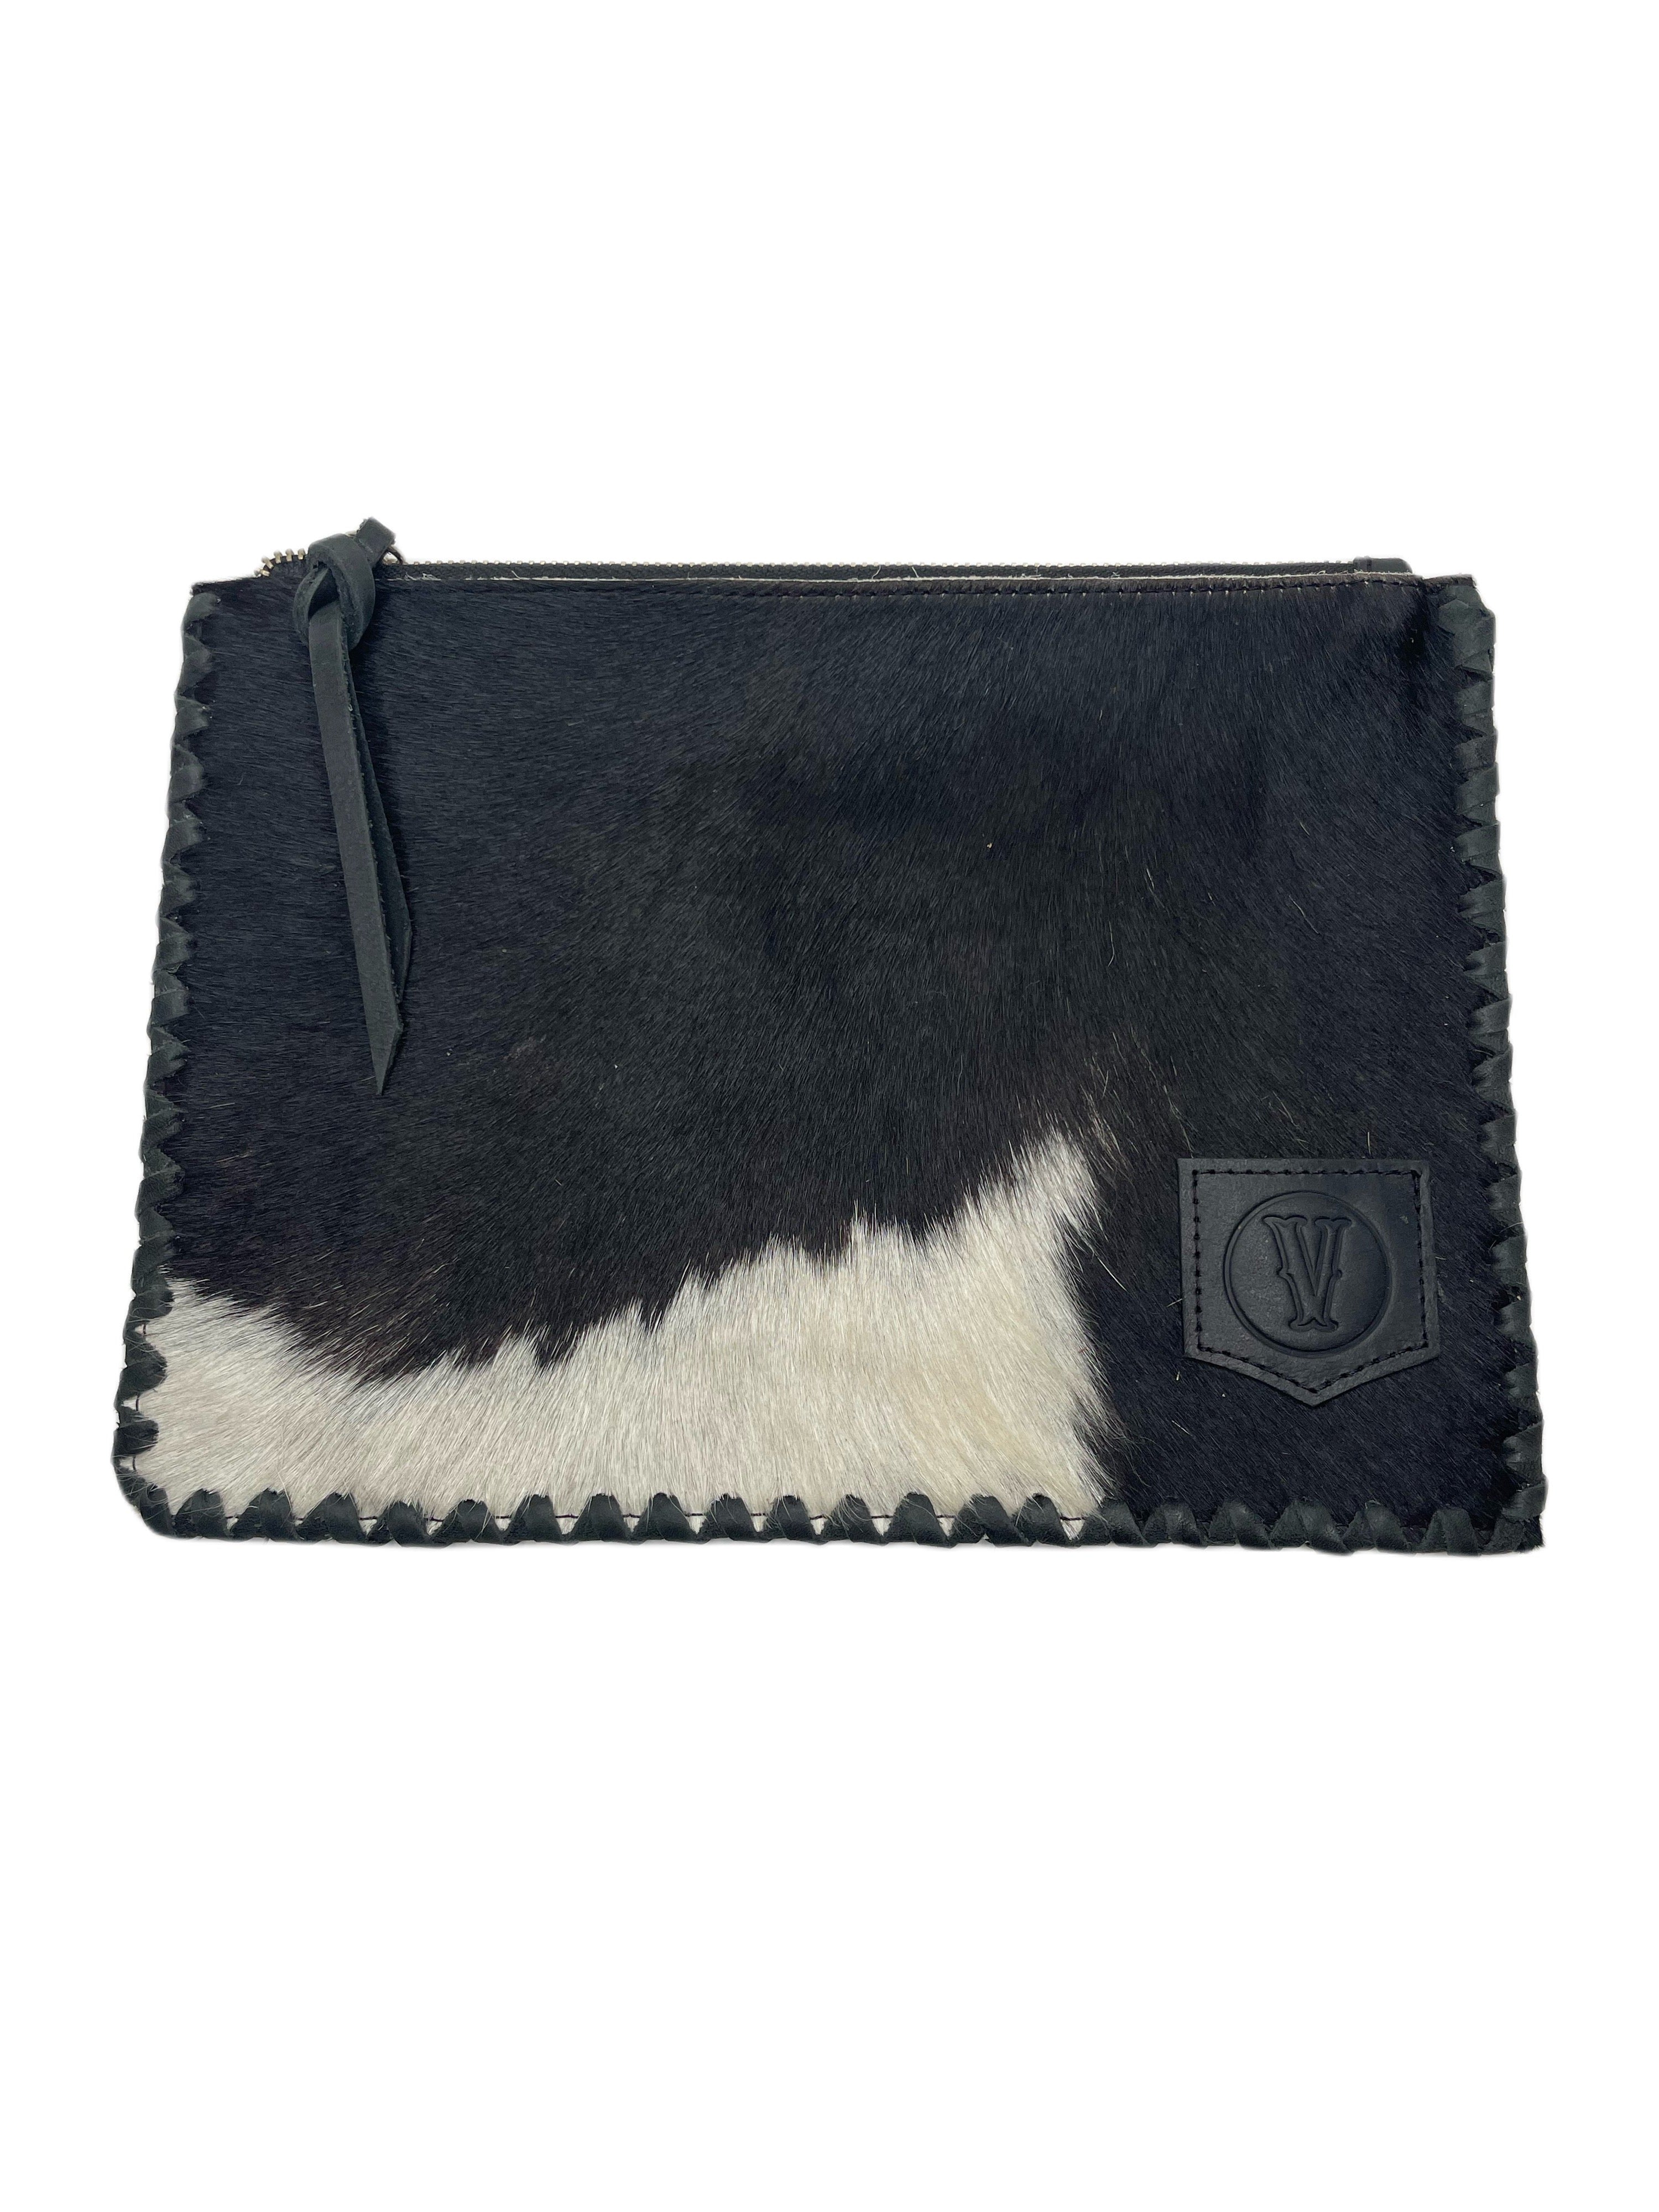 The Cowhide Essentials Clutch